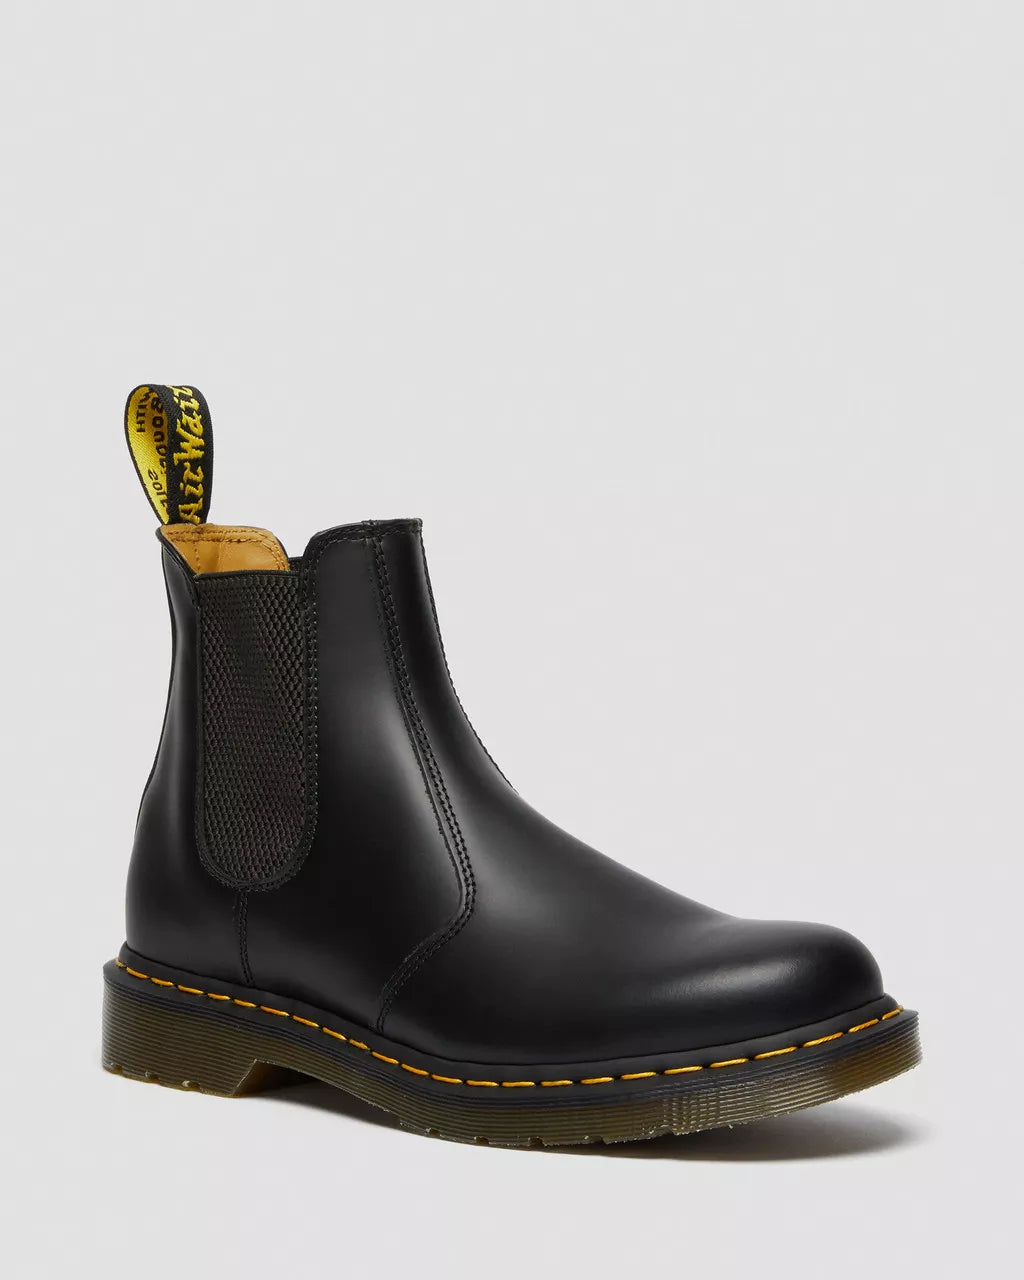 2976 YELLOW STITCH SMOOTH LEATHER CHELSEA BOOTS / Dr. MARTENS